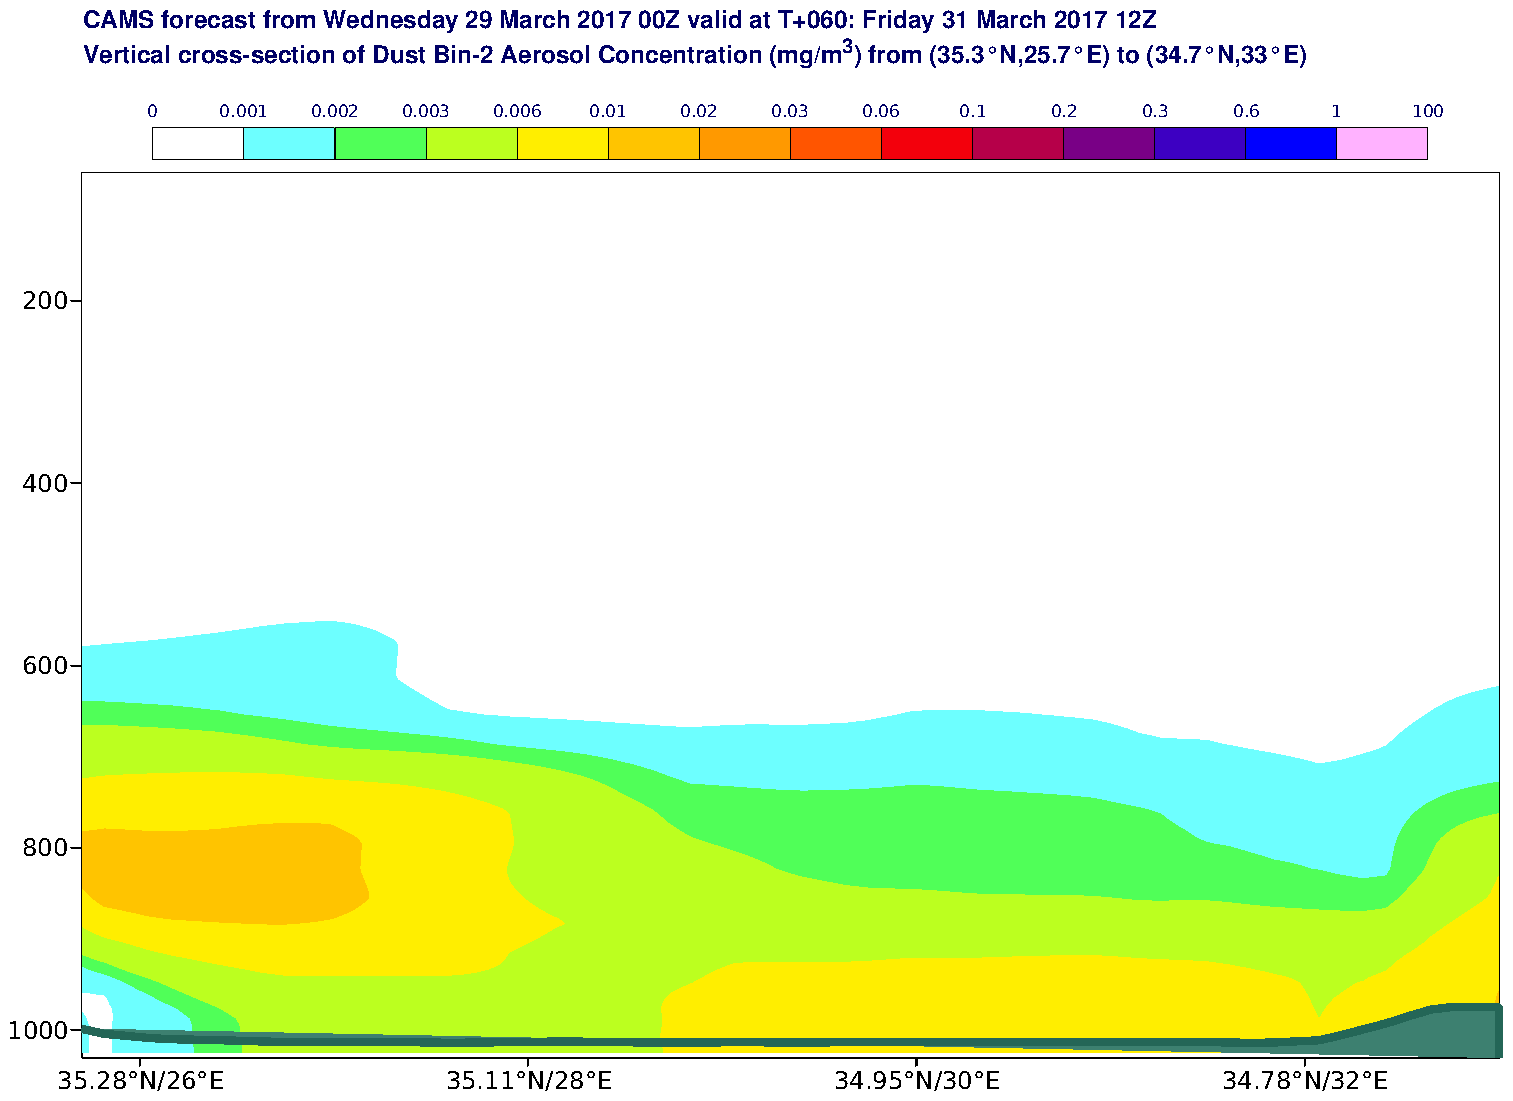 Vertical cross-section of Dust Bin-2 Aerosol Concentration (mg/m3) valid at T60 - 2017-03-31 12:00